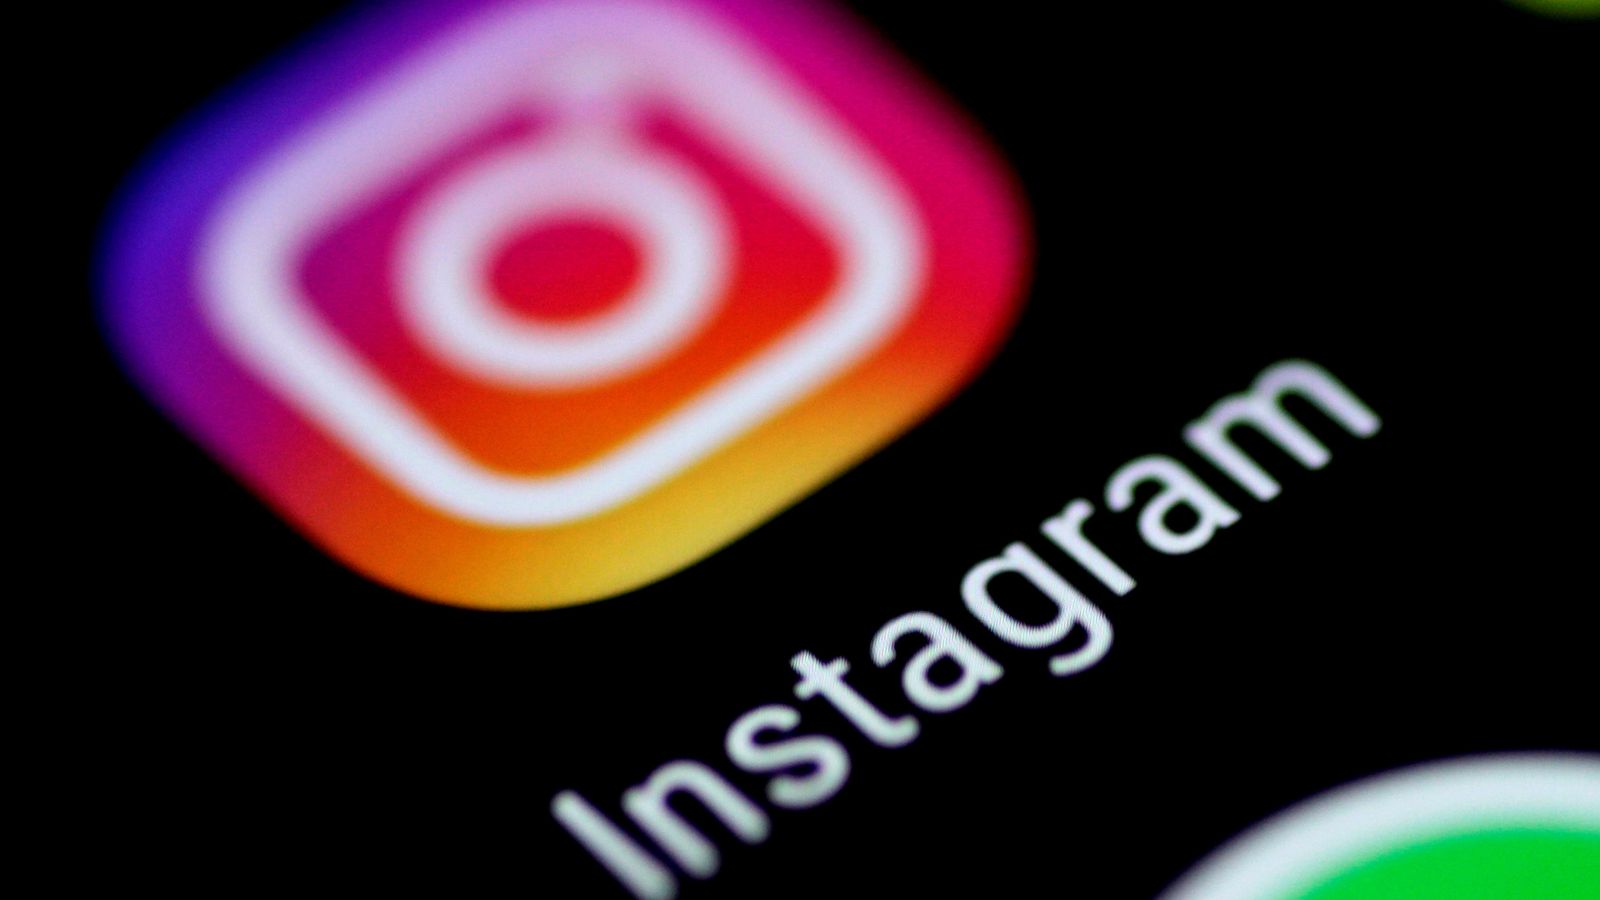 Instagram adds option to show pronouns on profile